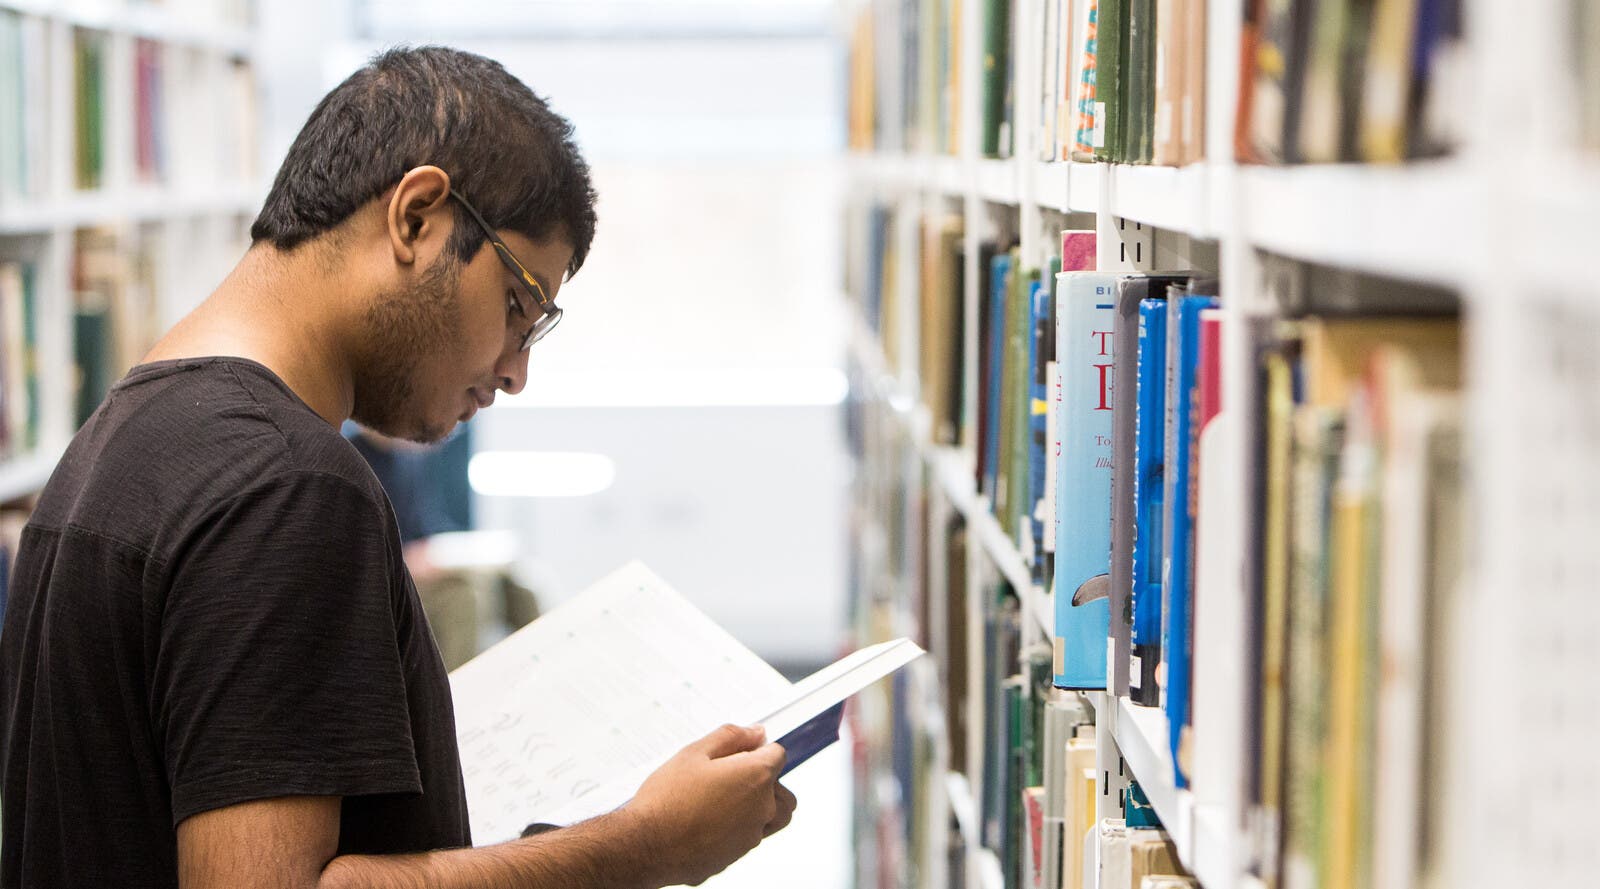 An international student reading a book in the library